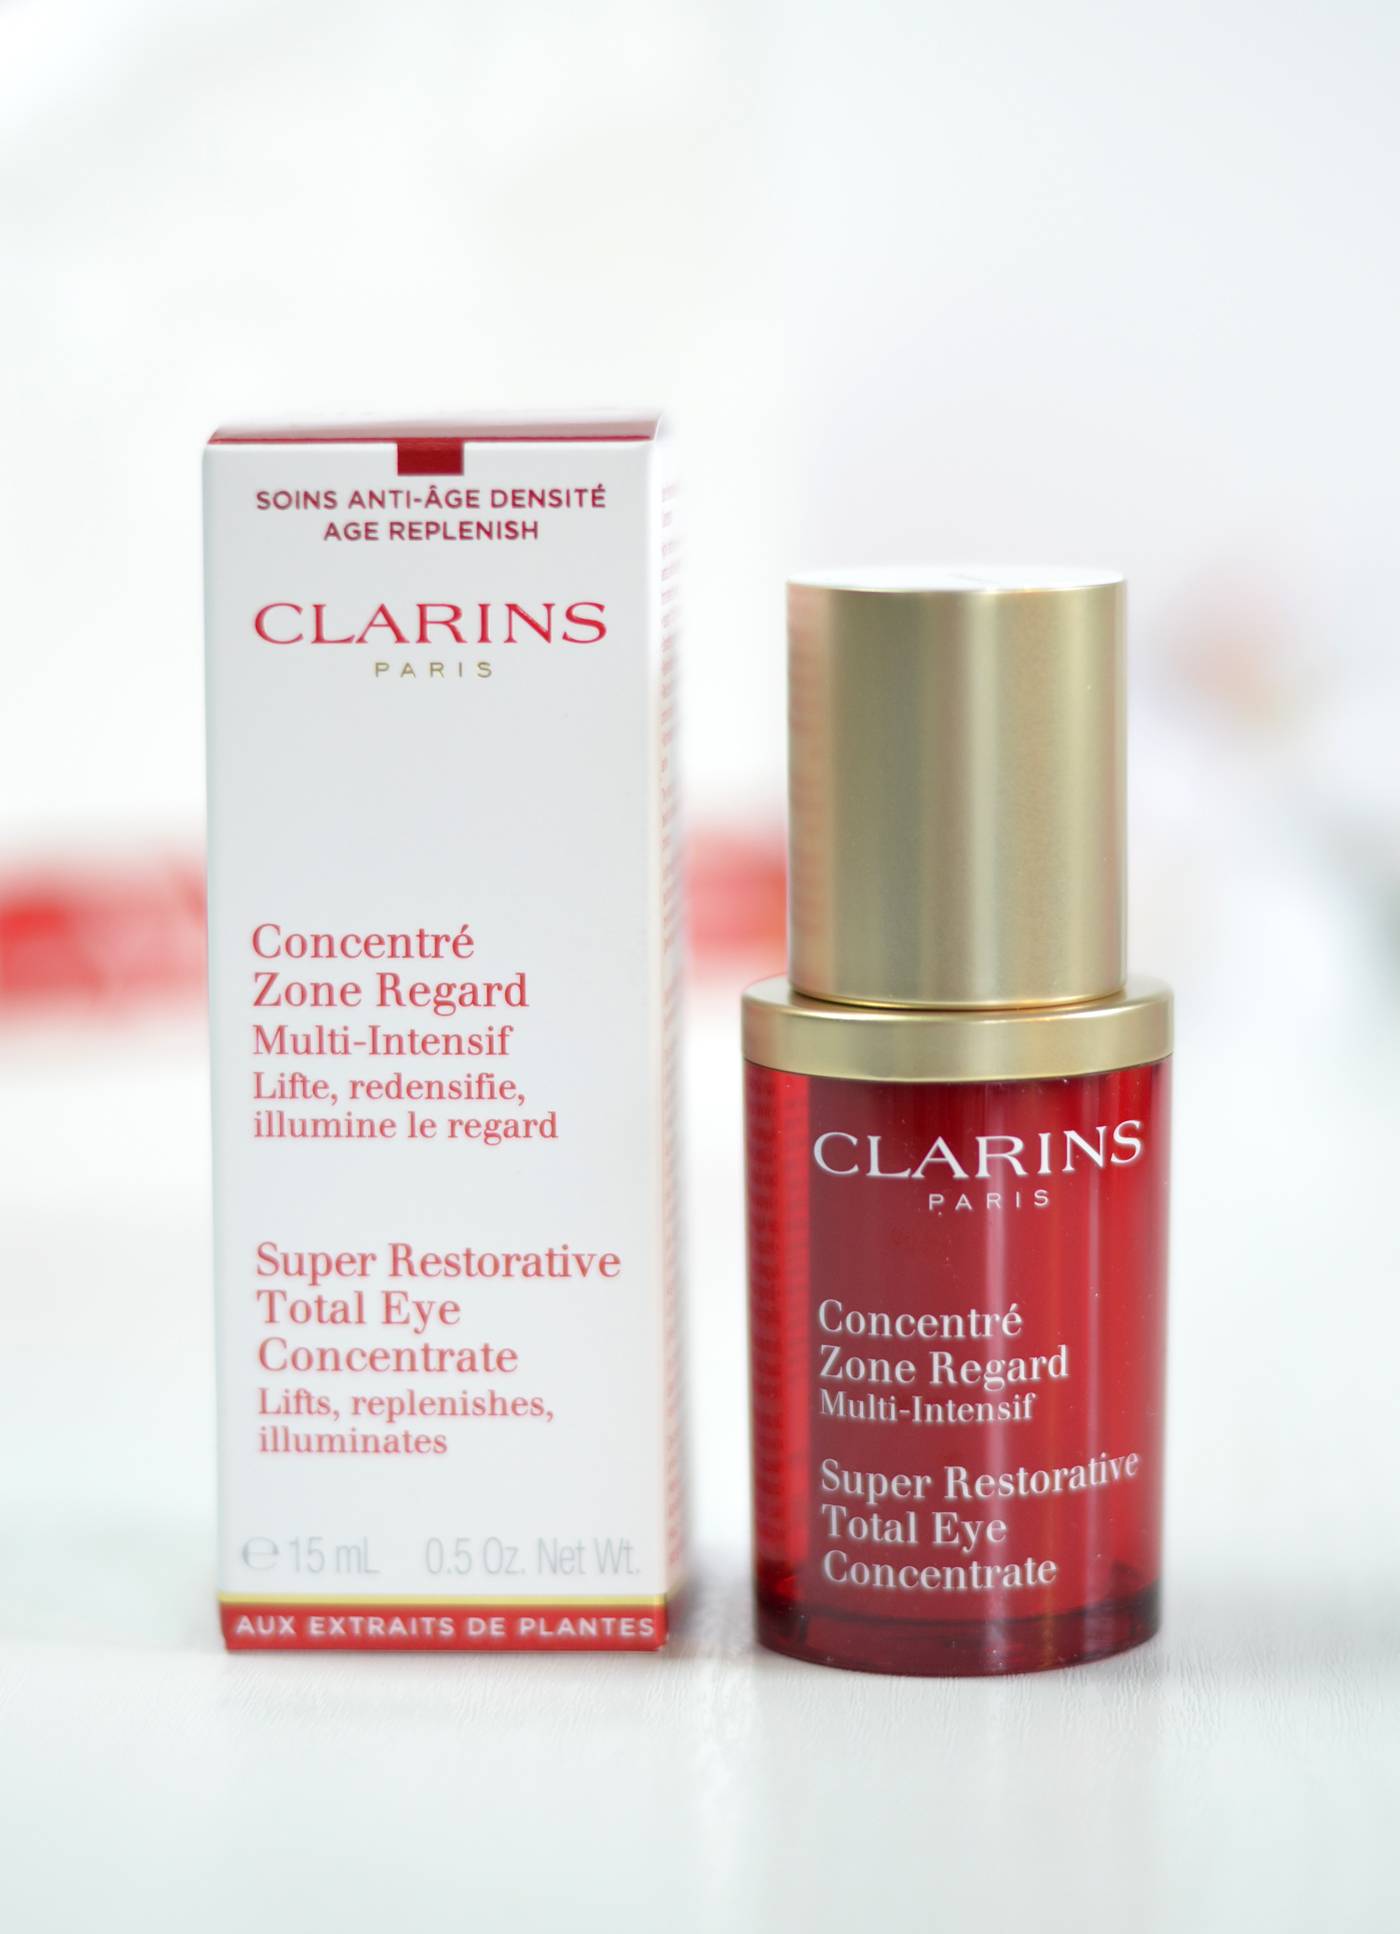 CLARINS SUPER RESTORATIVE TOTAL EYE CONCENTRATE REVIEW